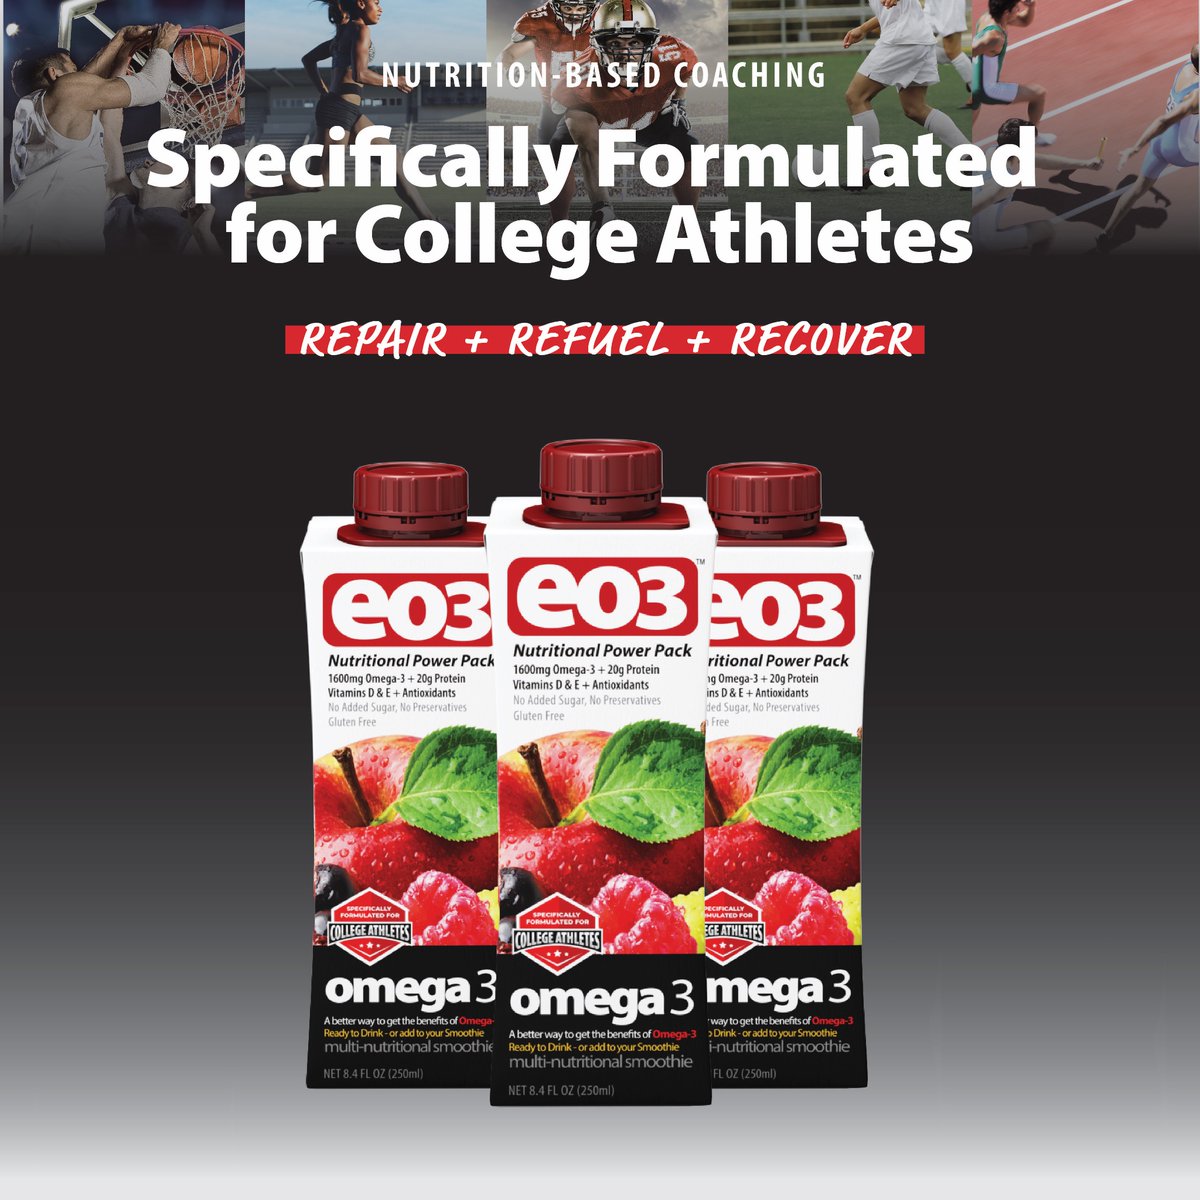 Multi-Nutritional Fruit Smoothie 🍎

✔️Reduces Muscle Damage & Soreness
✔️ Supports a Healthy Inflammatory and Antioxidant Response
✔️ Shortens Recovery Time Between Workouts
✔️ Stimulates Muscle Growth

Formulated for Complete Recovery 💪

#omega3 #recovery #collegesport